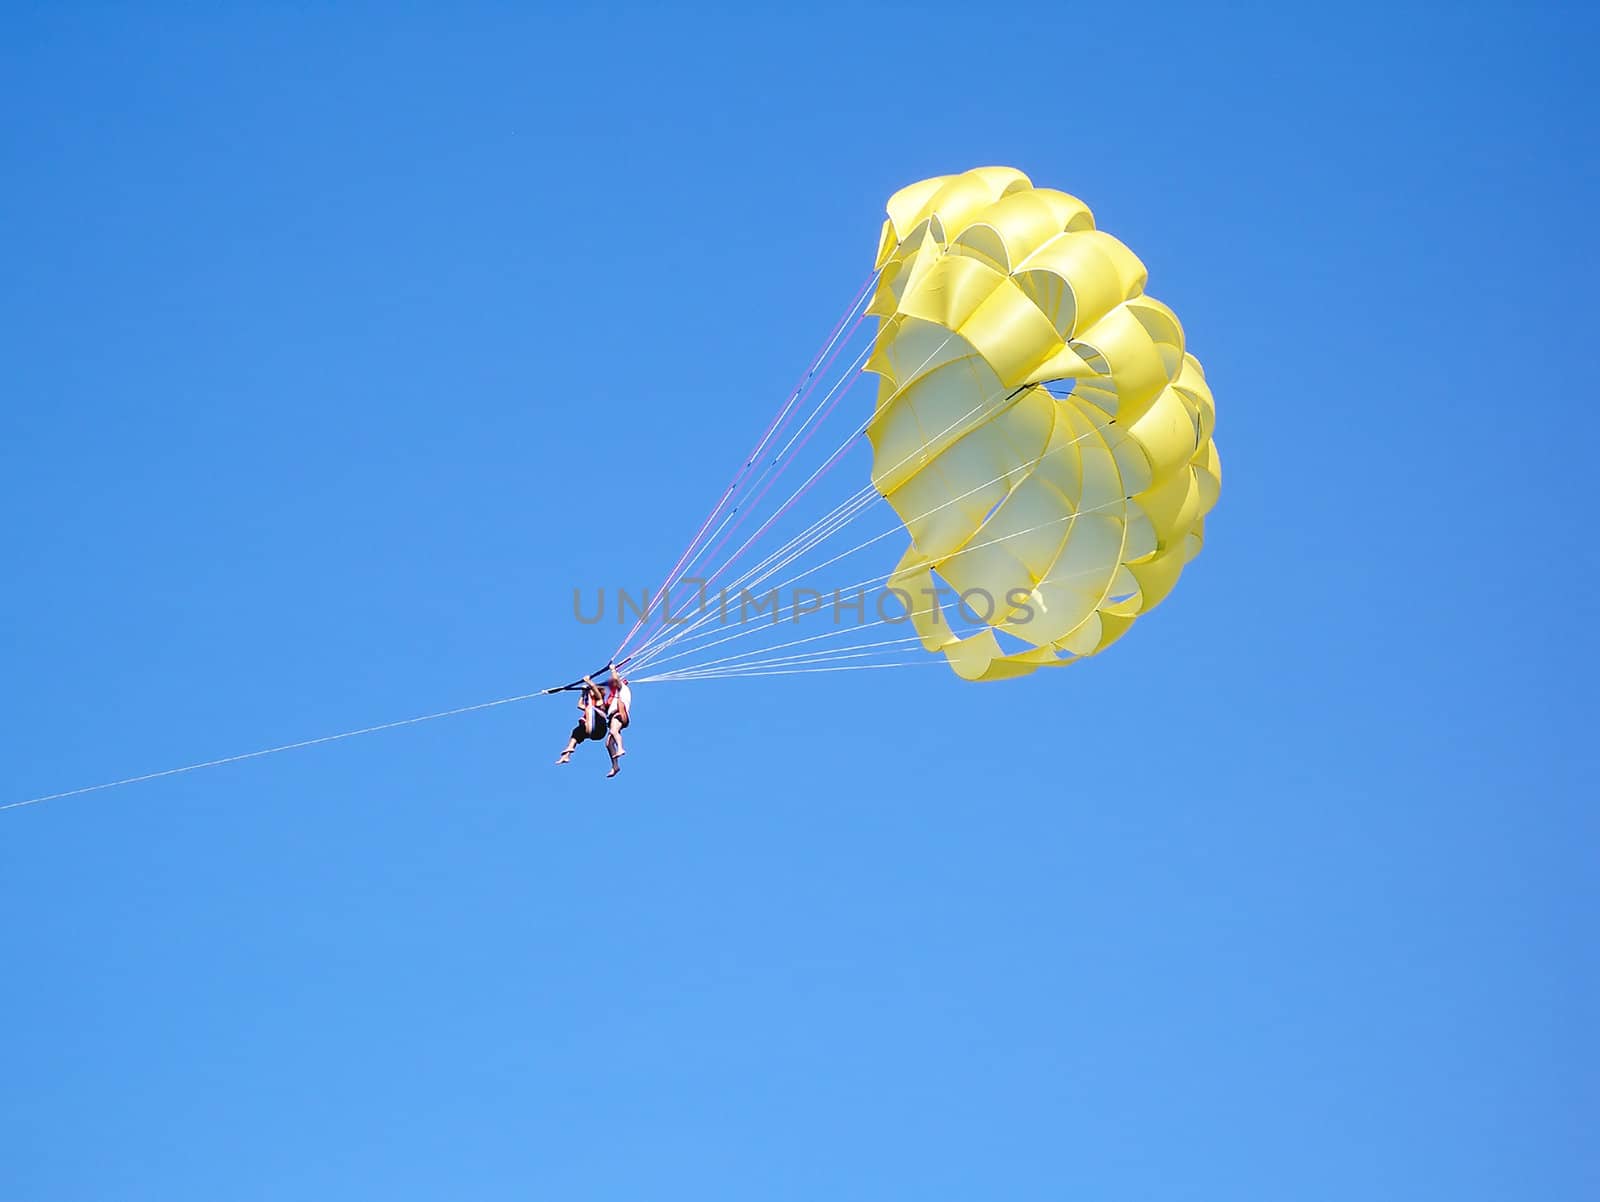 Tandem flight with a parachute over the ocean